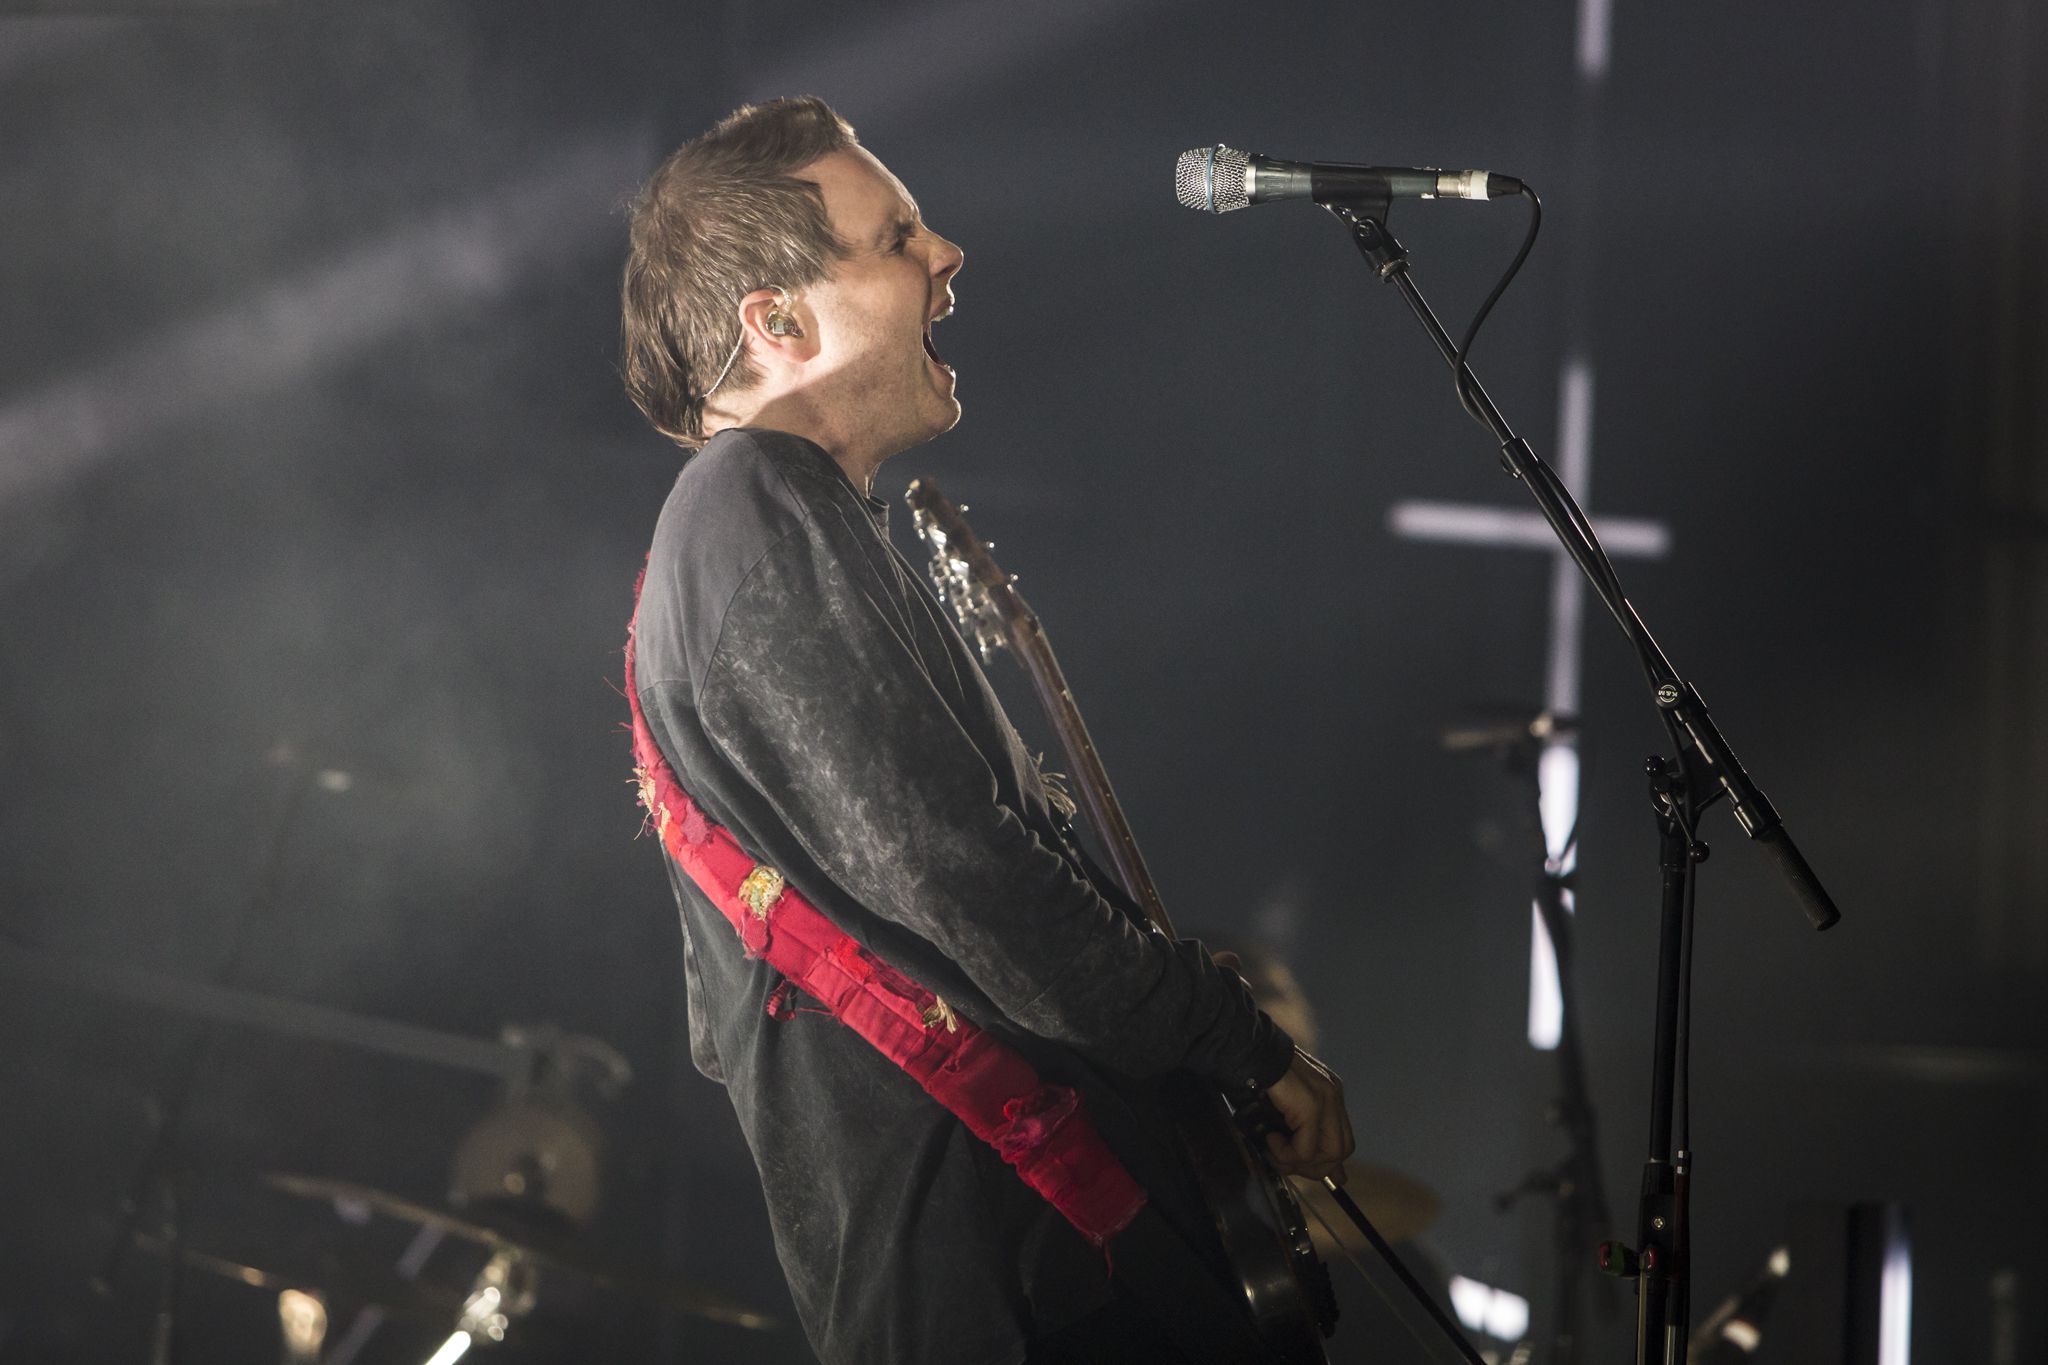 sigur ros 17 Live Review: Sigur Rós at the Fox Theater in Pomona (4/10)